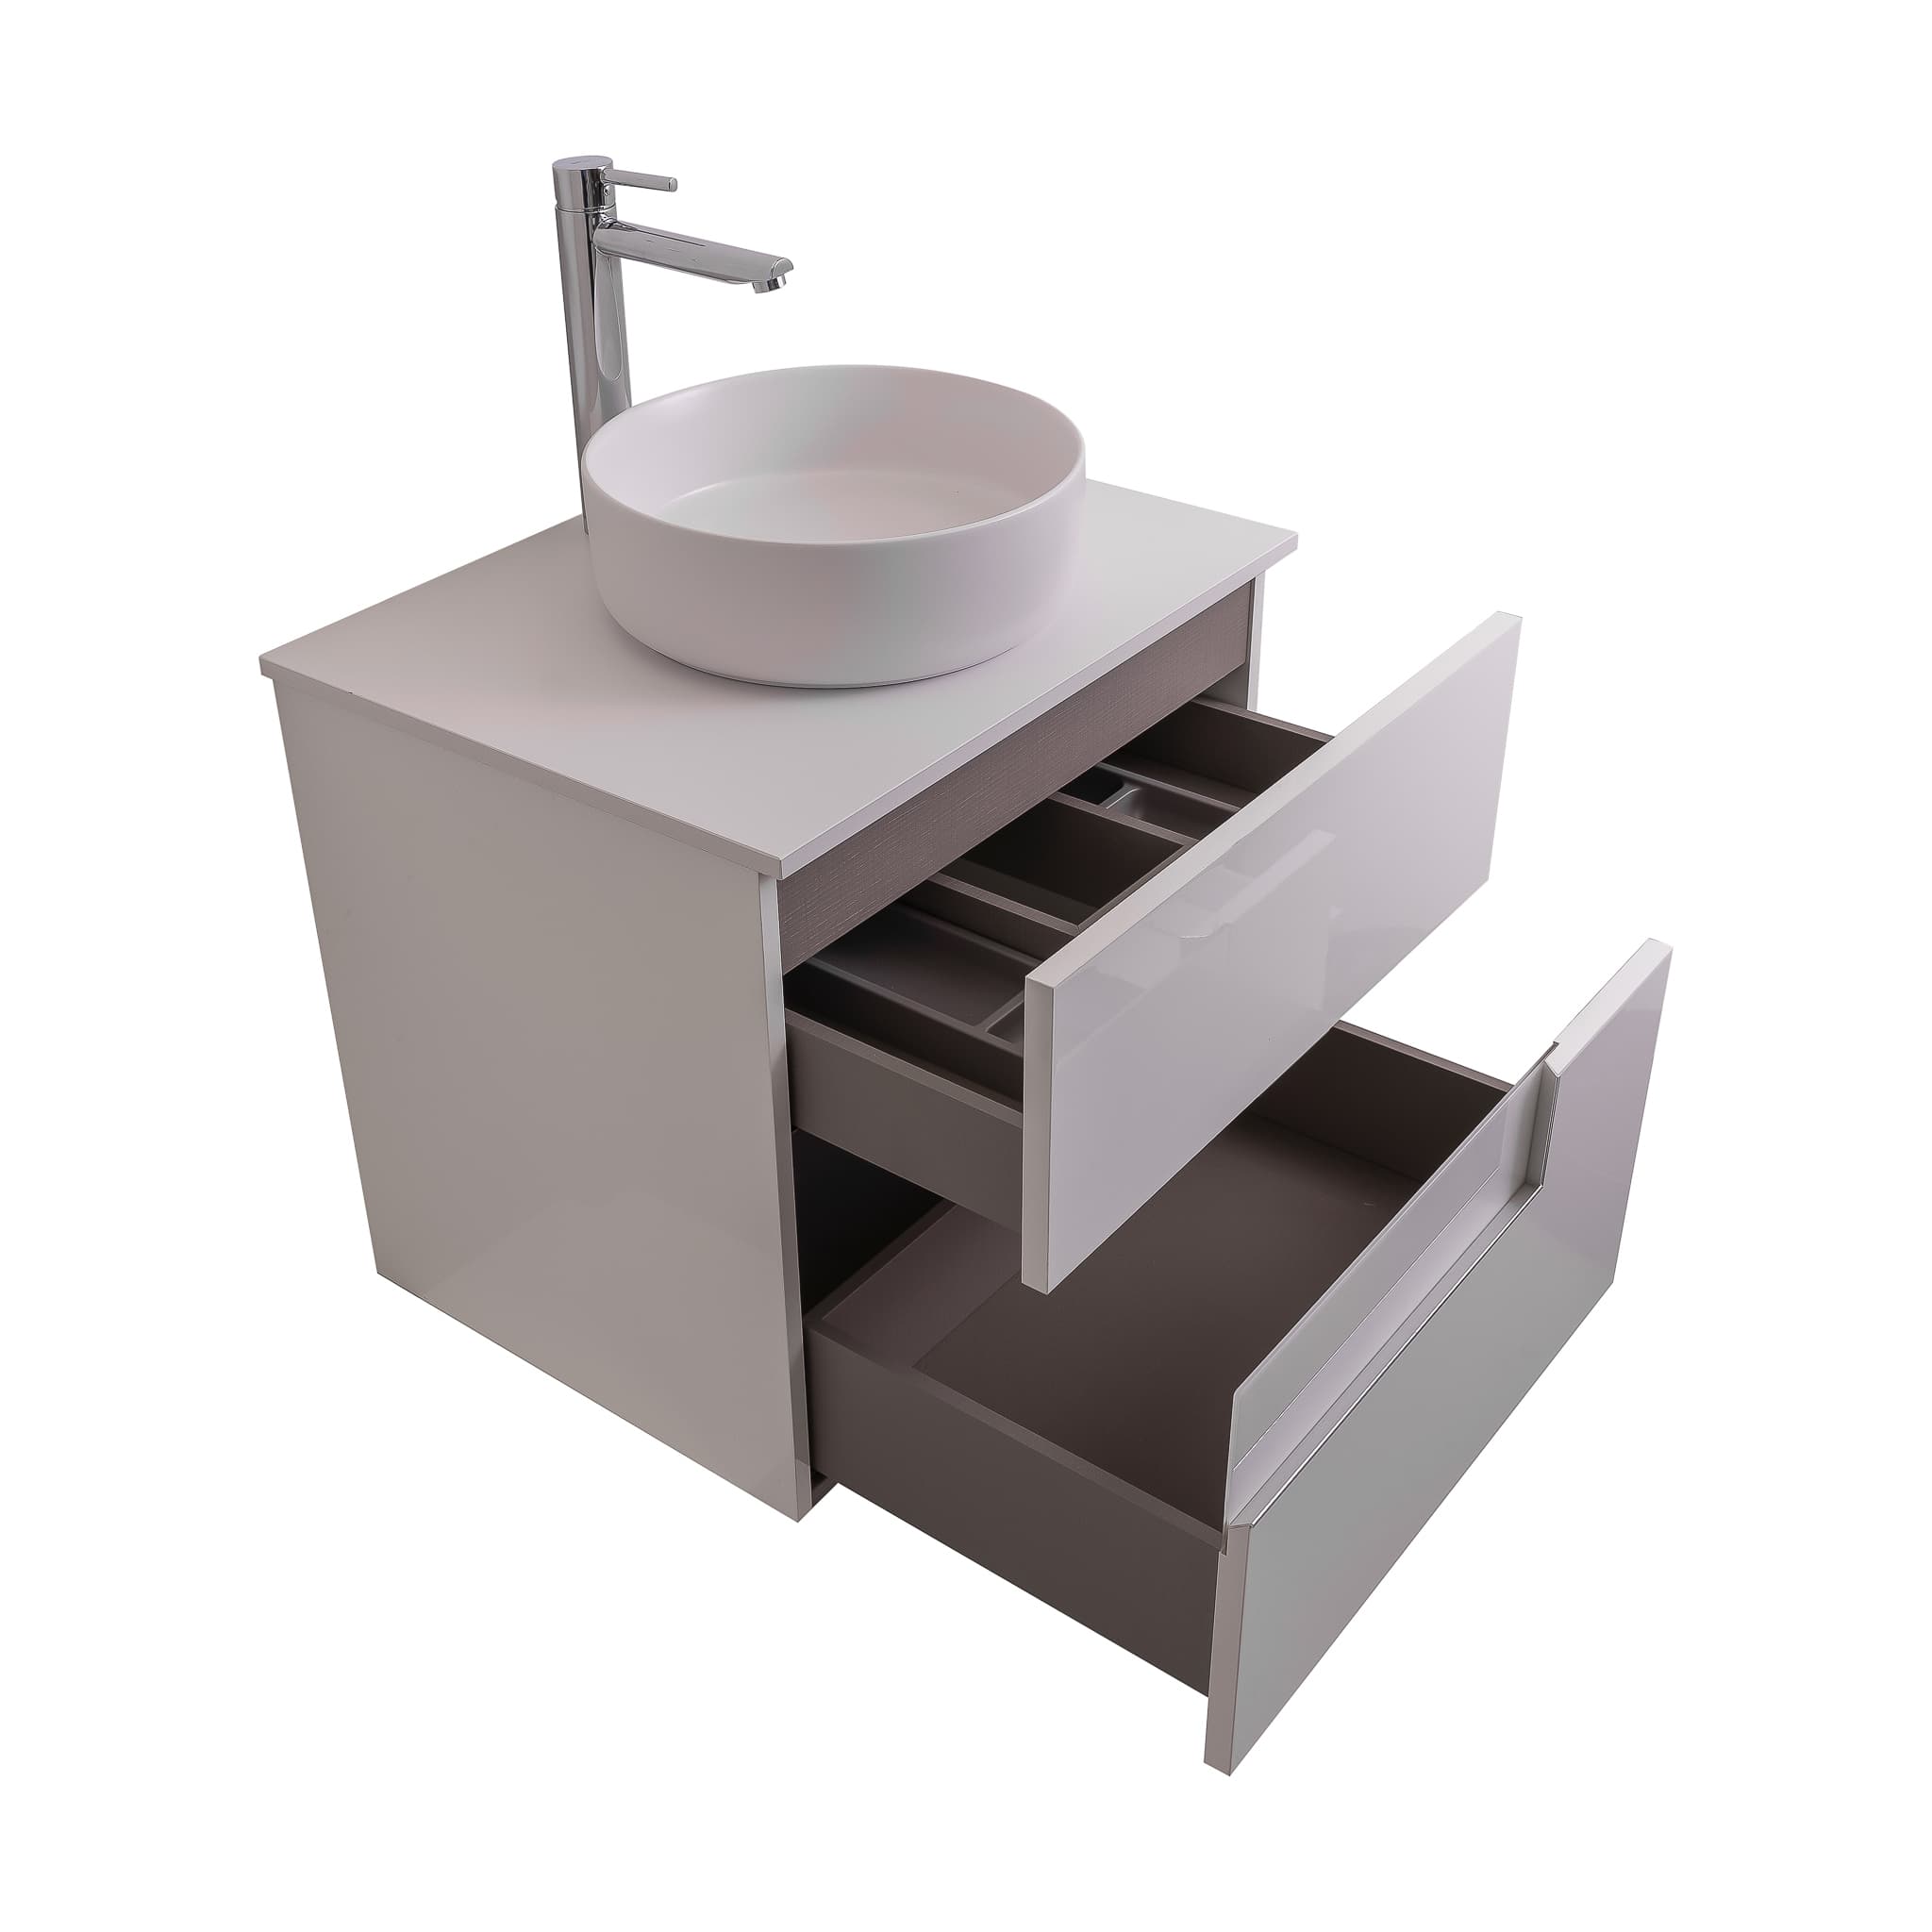 Vision 23.5 White High Gloss Cabinet, Ares White Top And Ares White Ceramic Basin, Wall Mounted Modern Vanity Set